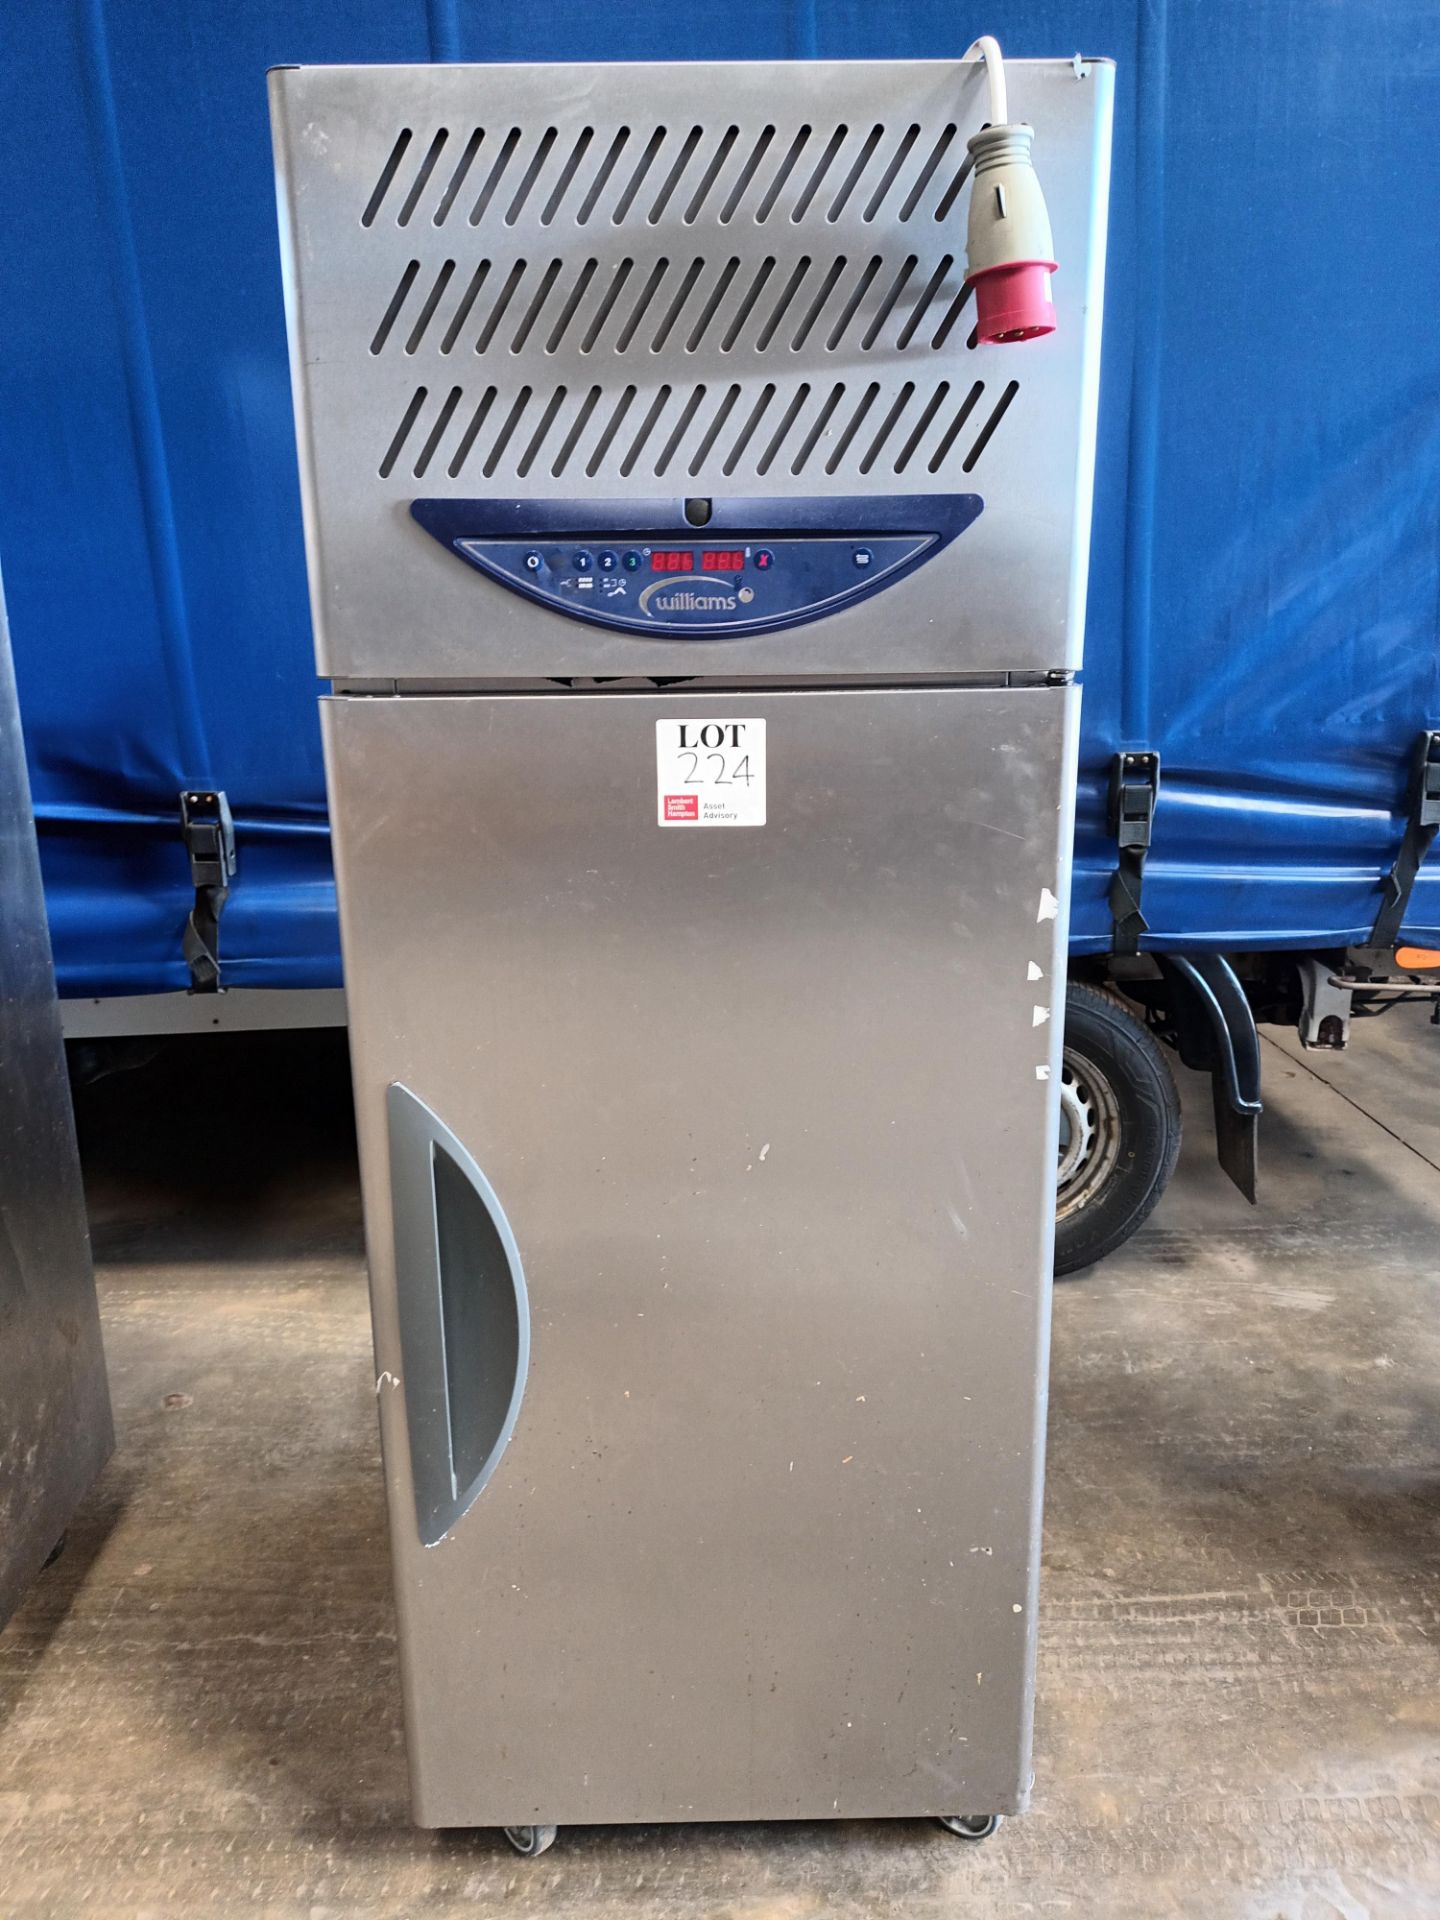 Williams WBC50R1 commercial reach-in blast chiller (Located: Hanslope)